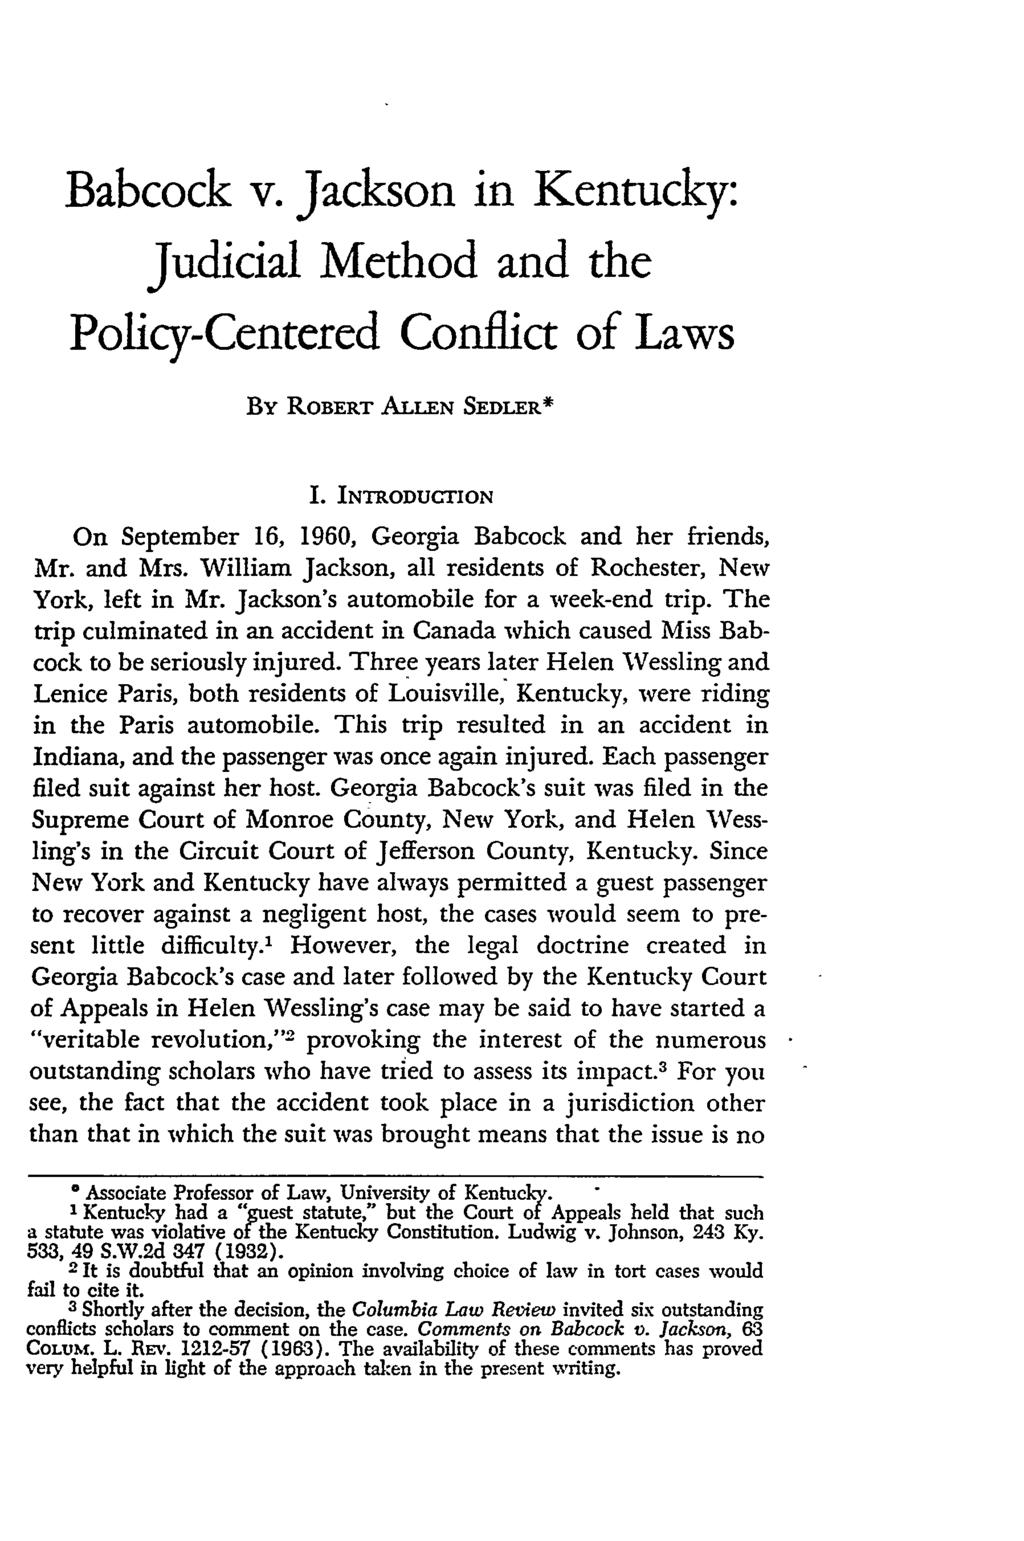 Babcock v. Jackson in Kentucky: Judicial Method and the Policy-Centered Conflict of Laws By ROBERT ALLEN SEDLER* I. INTRODUCTION On September 16, 1960, Georgia Babcock and her friends, Mr. and Mrs.